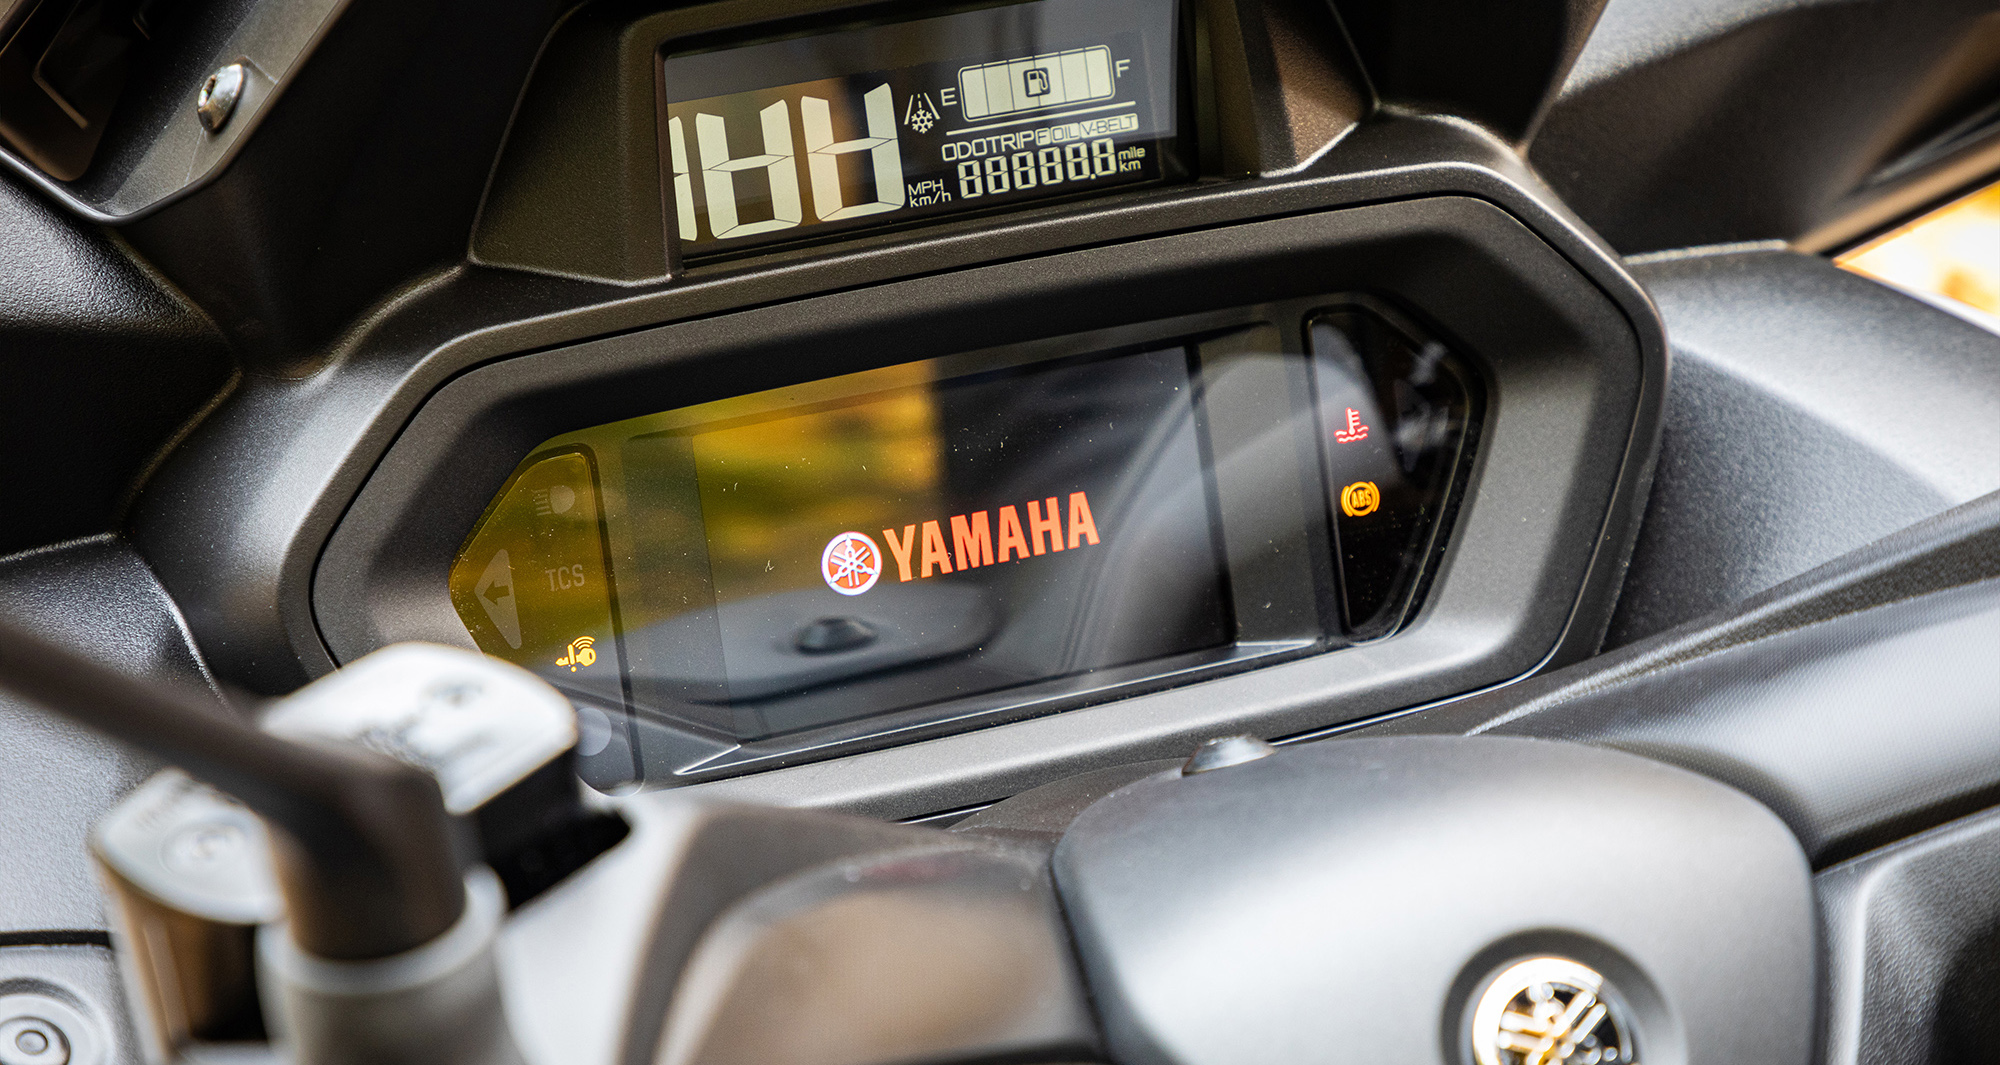 Which support of smartphone to choose for a Yamaha MT-07